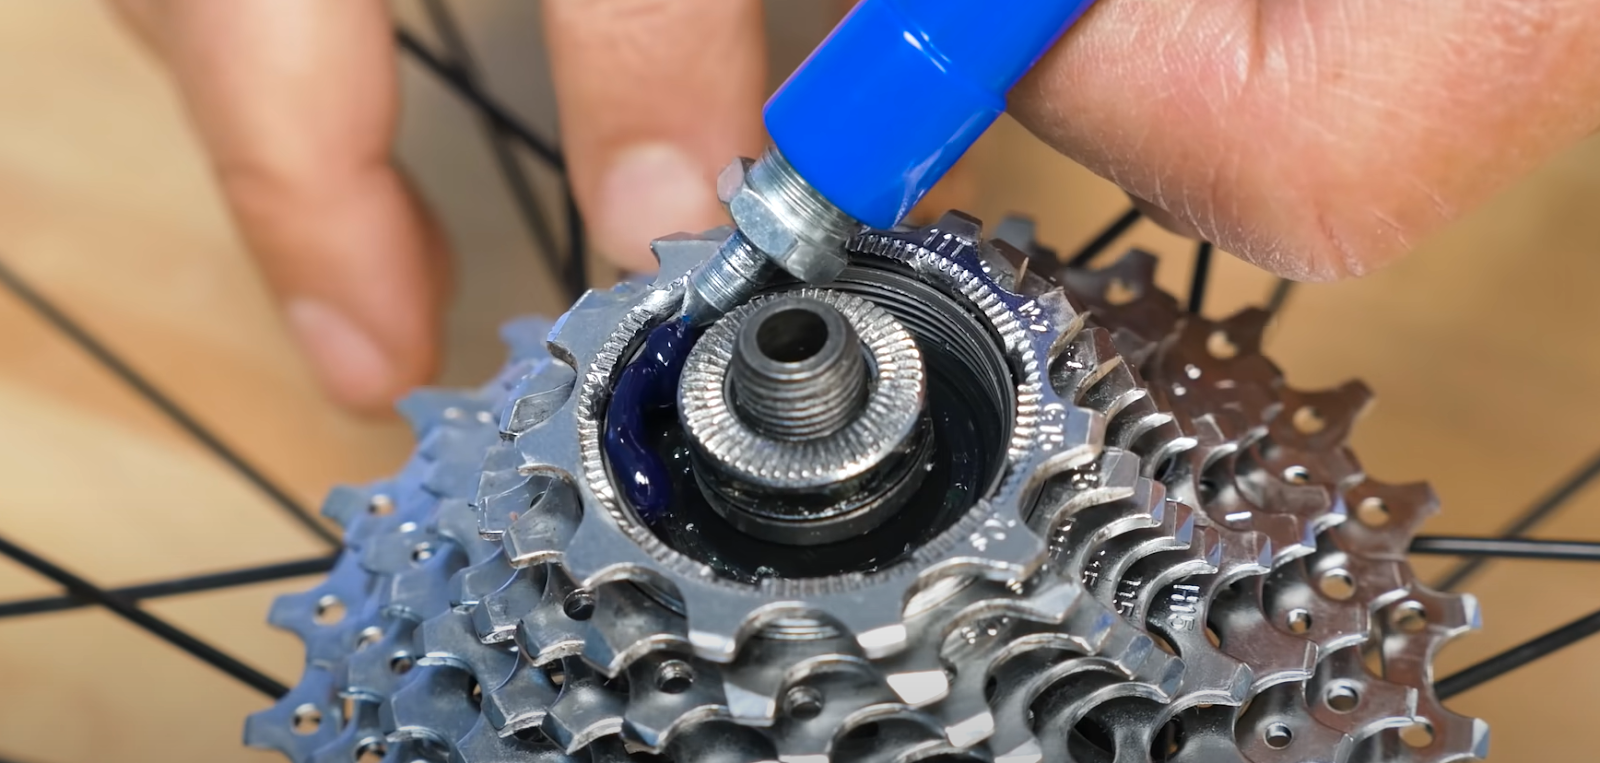 Make sure that you grease the cassette very well so that it works smoothly.